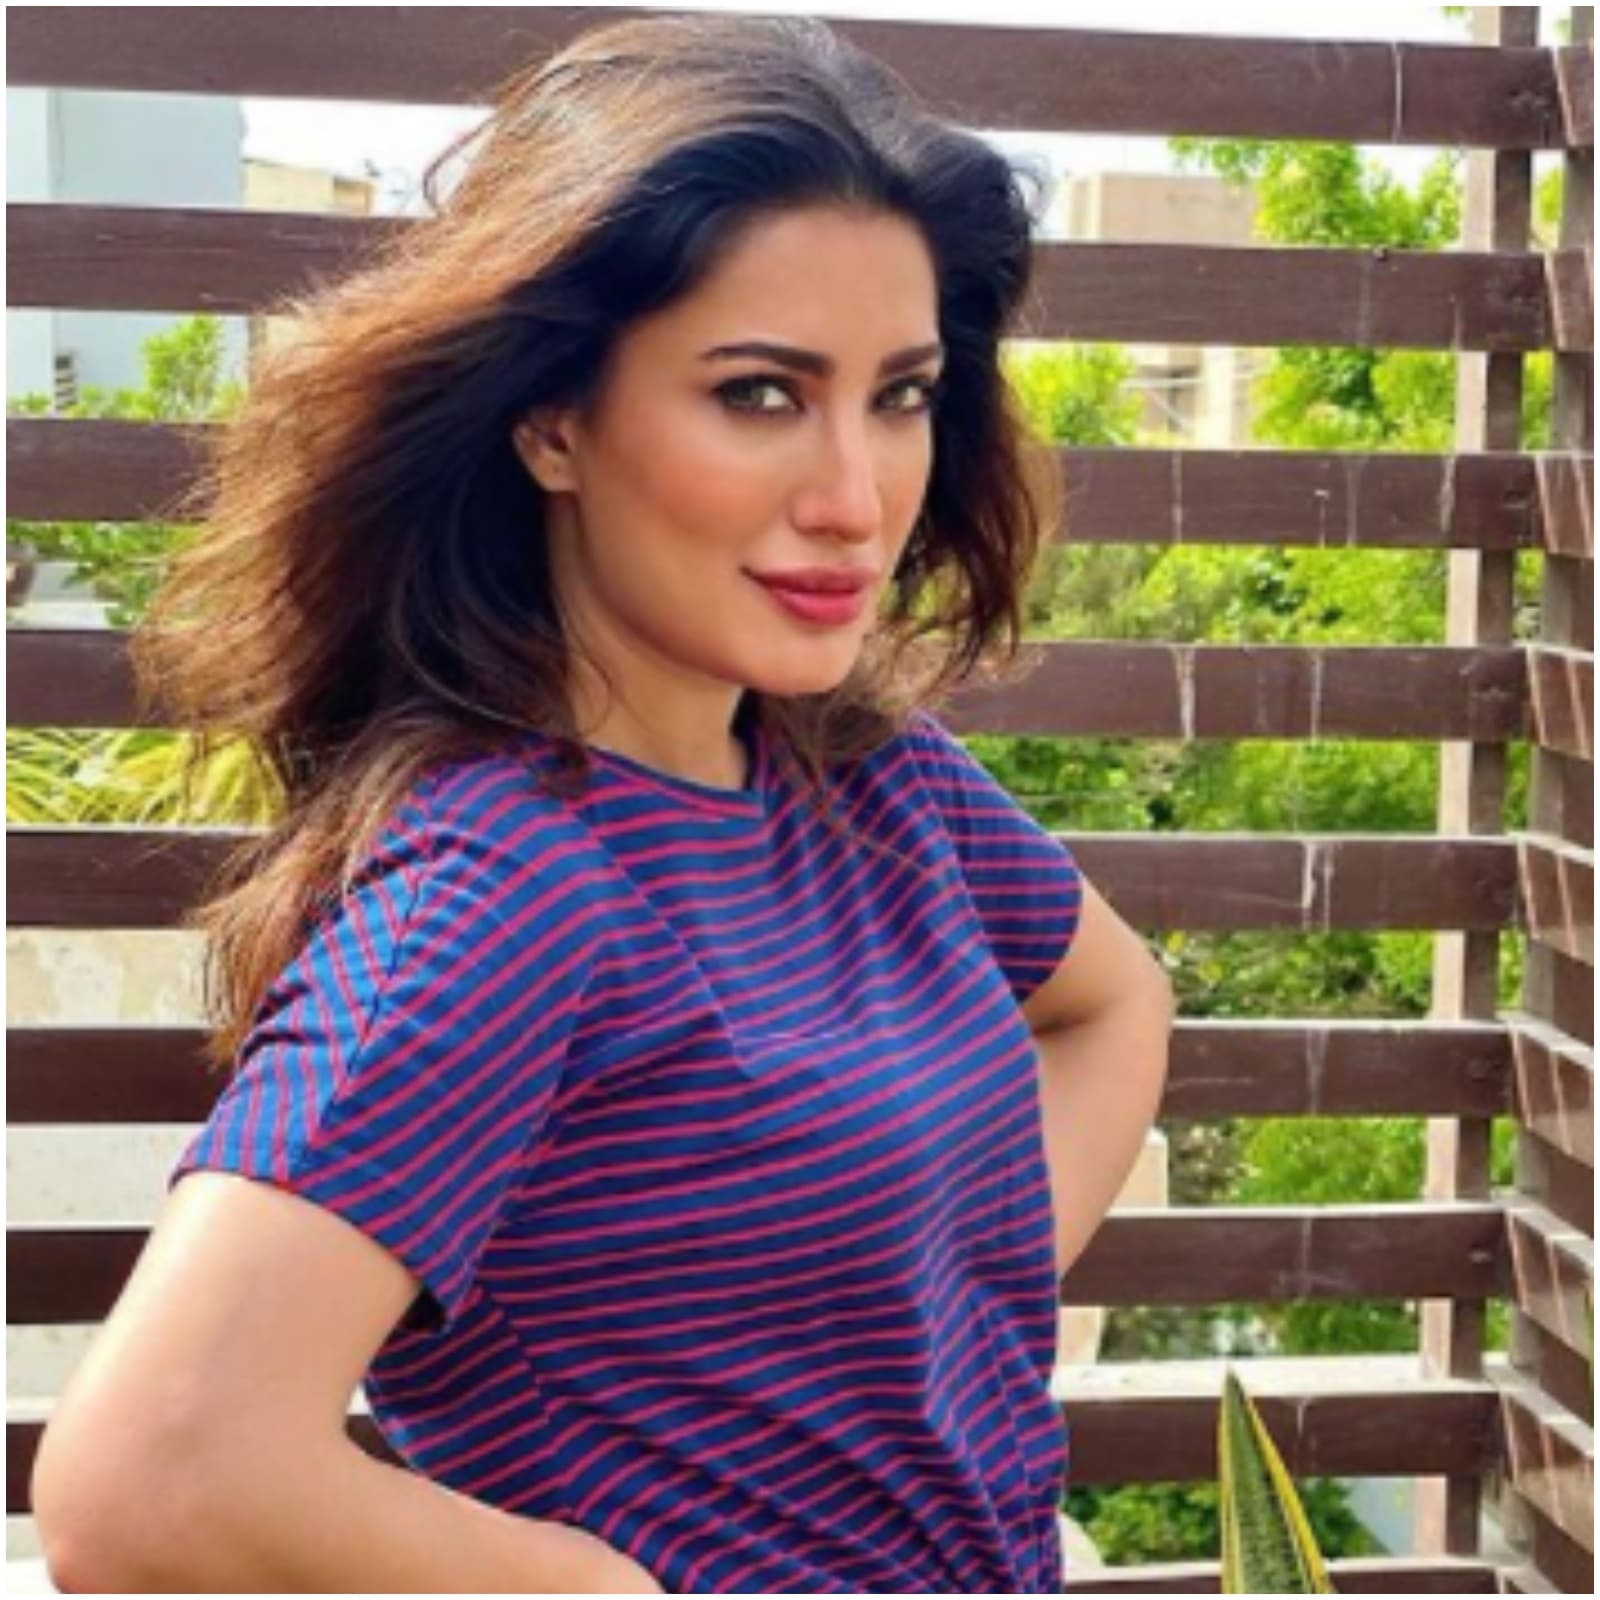 Mehwish Hayat Xnxx Video - Pakistani Actress Mehwish Hayat's Independence Day Post Goes Viral After  Netizens Comment on Her Bra - News18